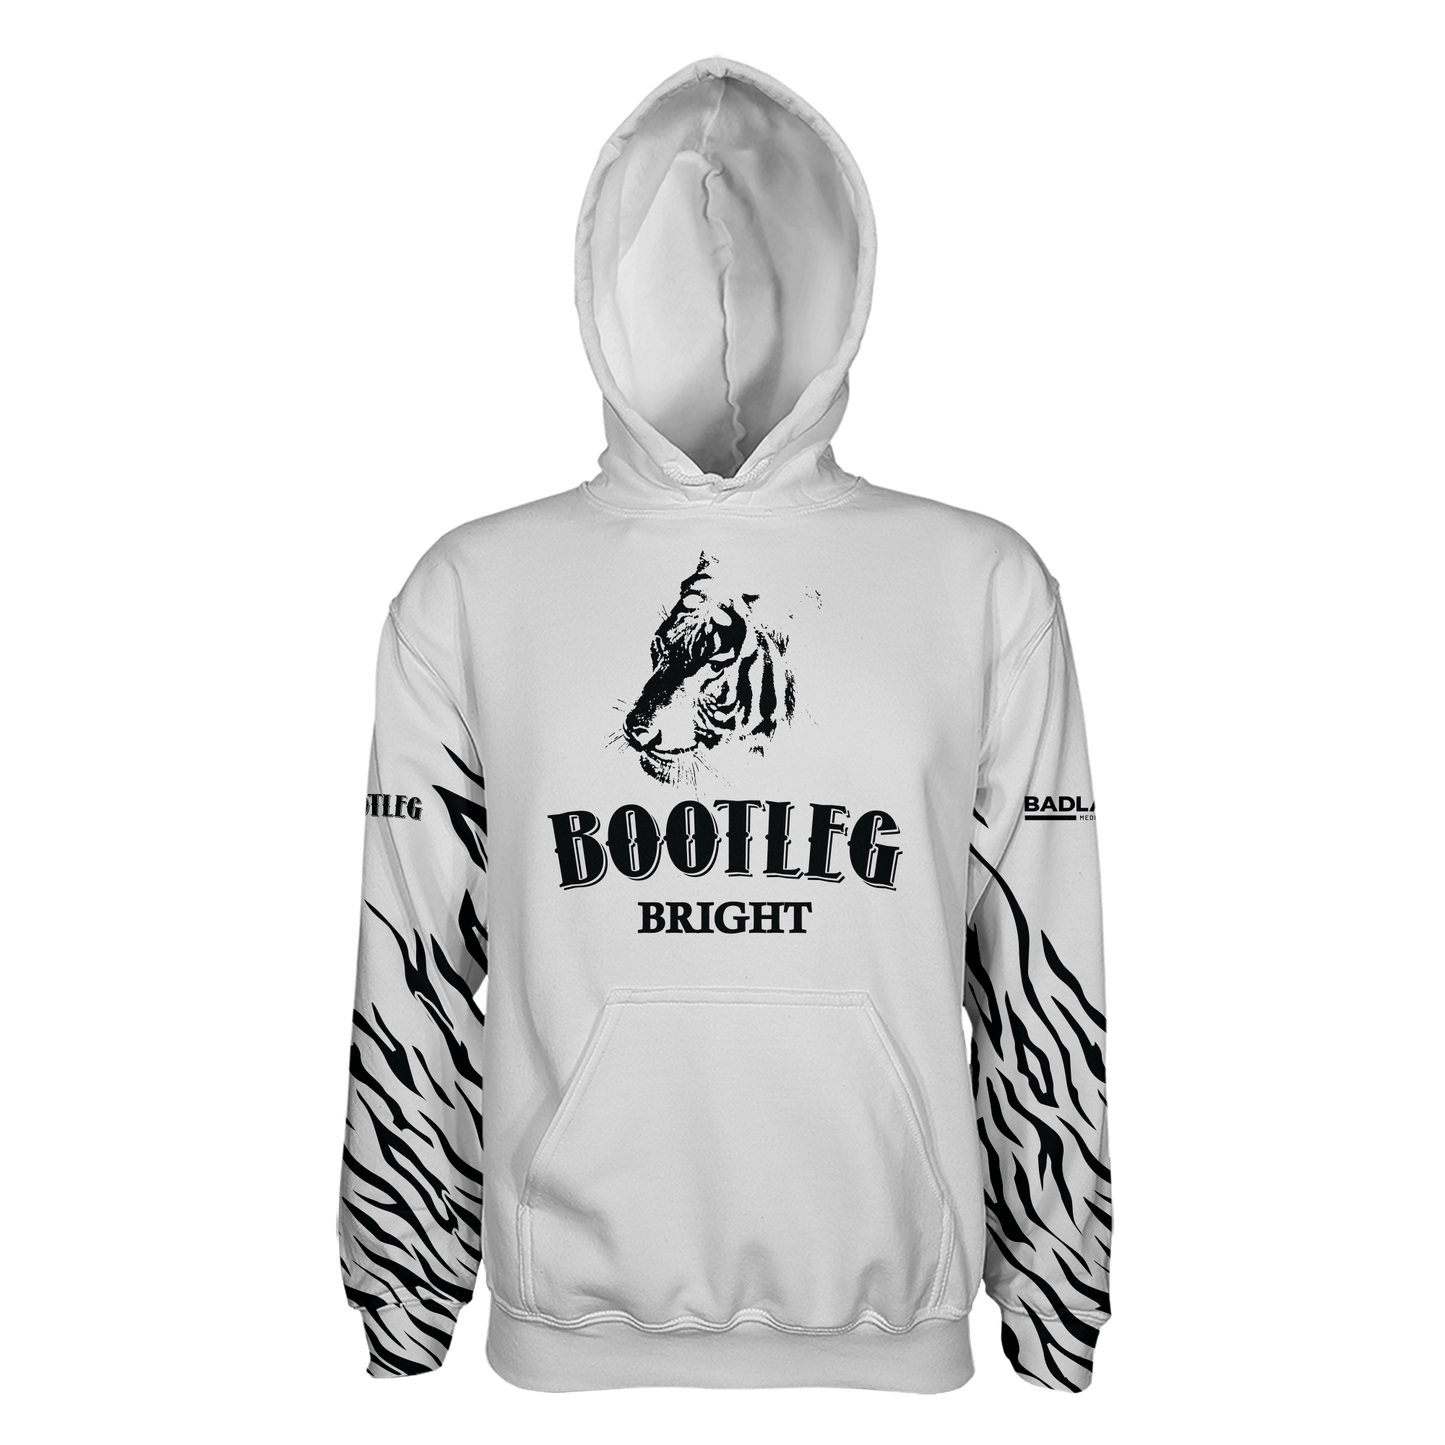 Small Tiger Bootleg Bright Pullover Hoodie